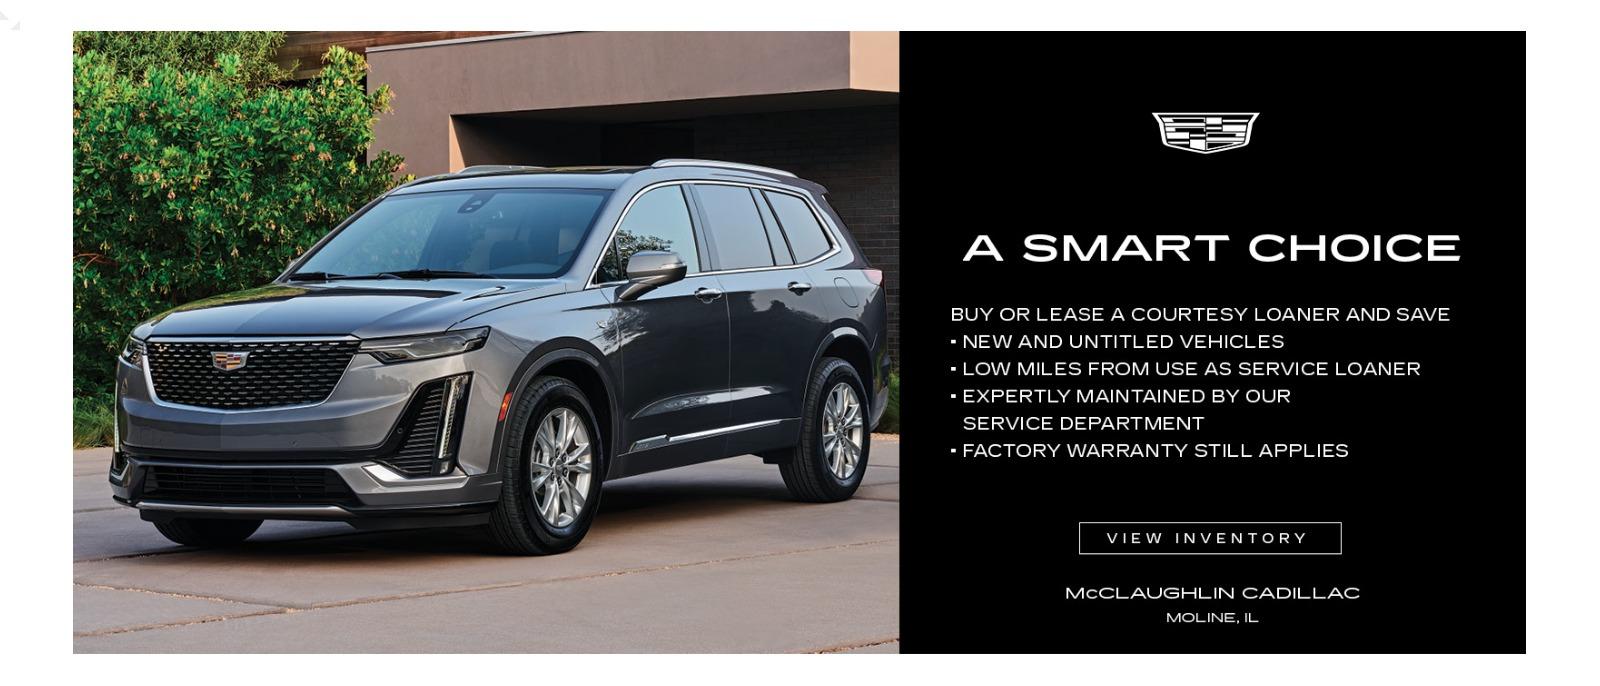 A smart choice. Buy or lease a new courtesy loner and save. New and untitled vehicles. Low miles from use as service loaner. Expertly maintained by our service department. Factory warranty still applies.